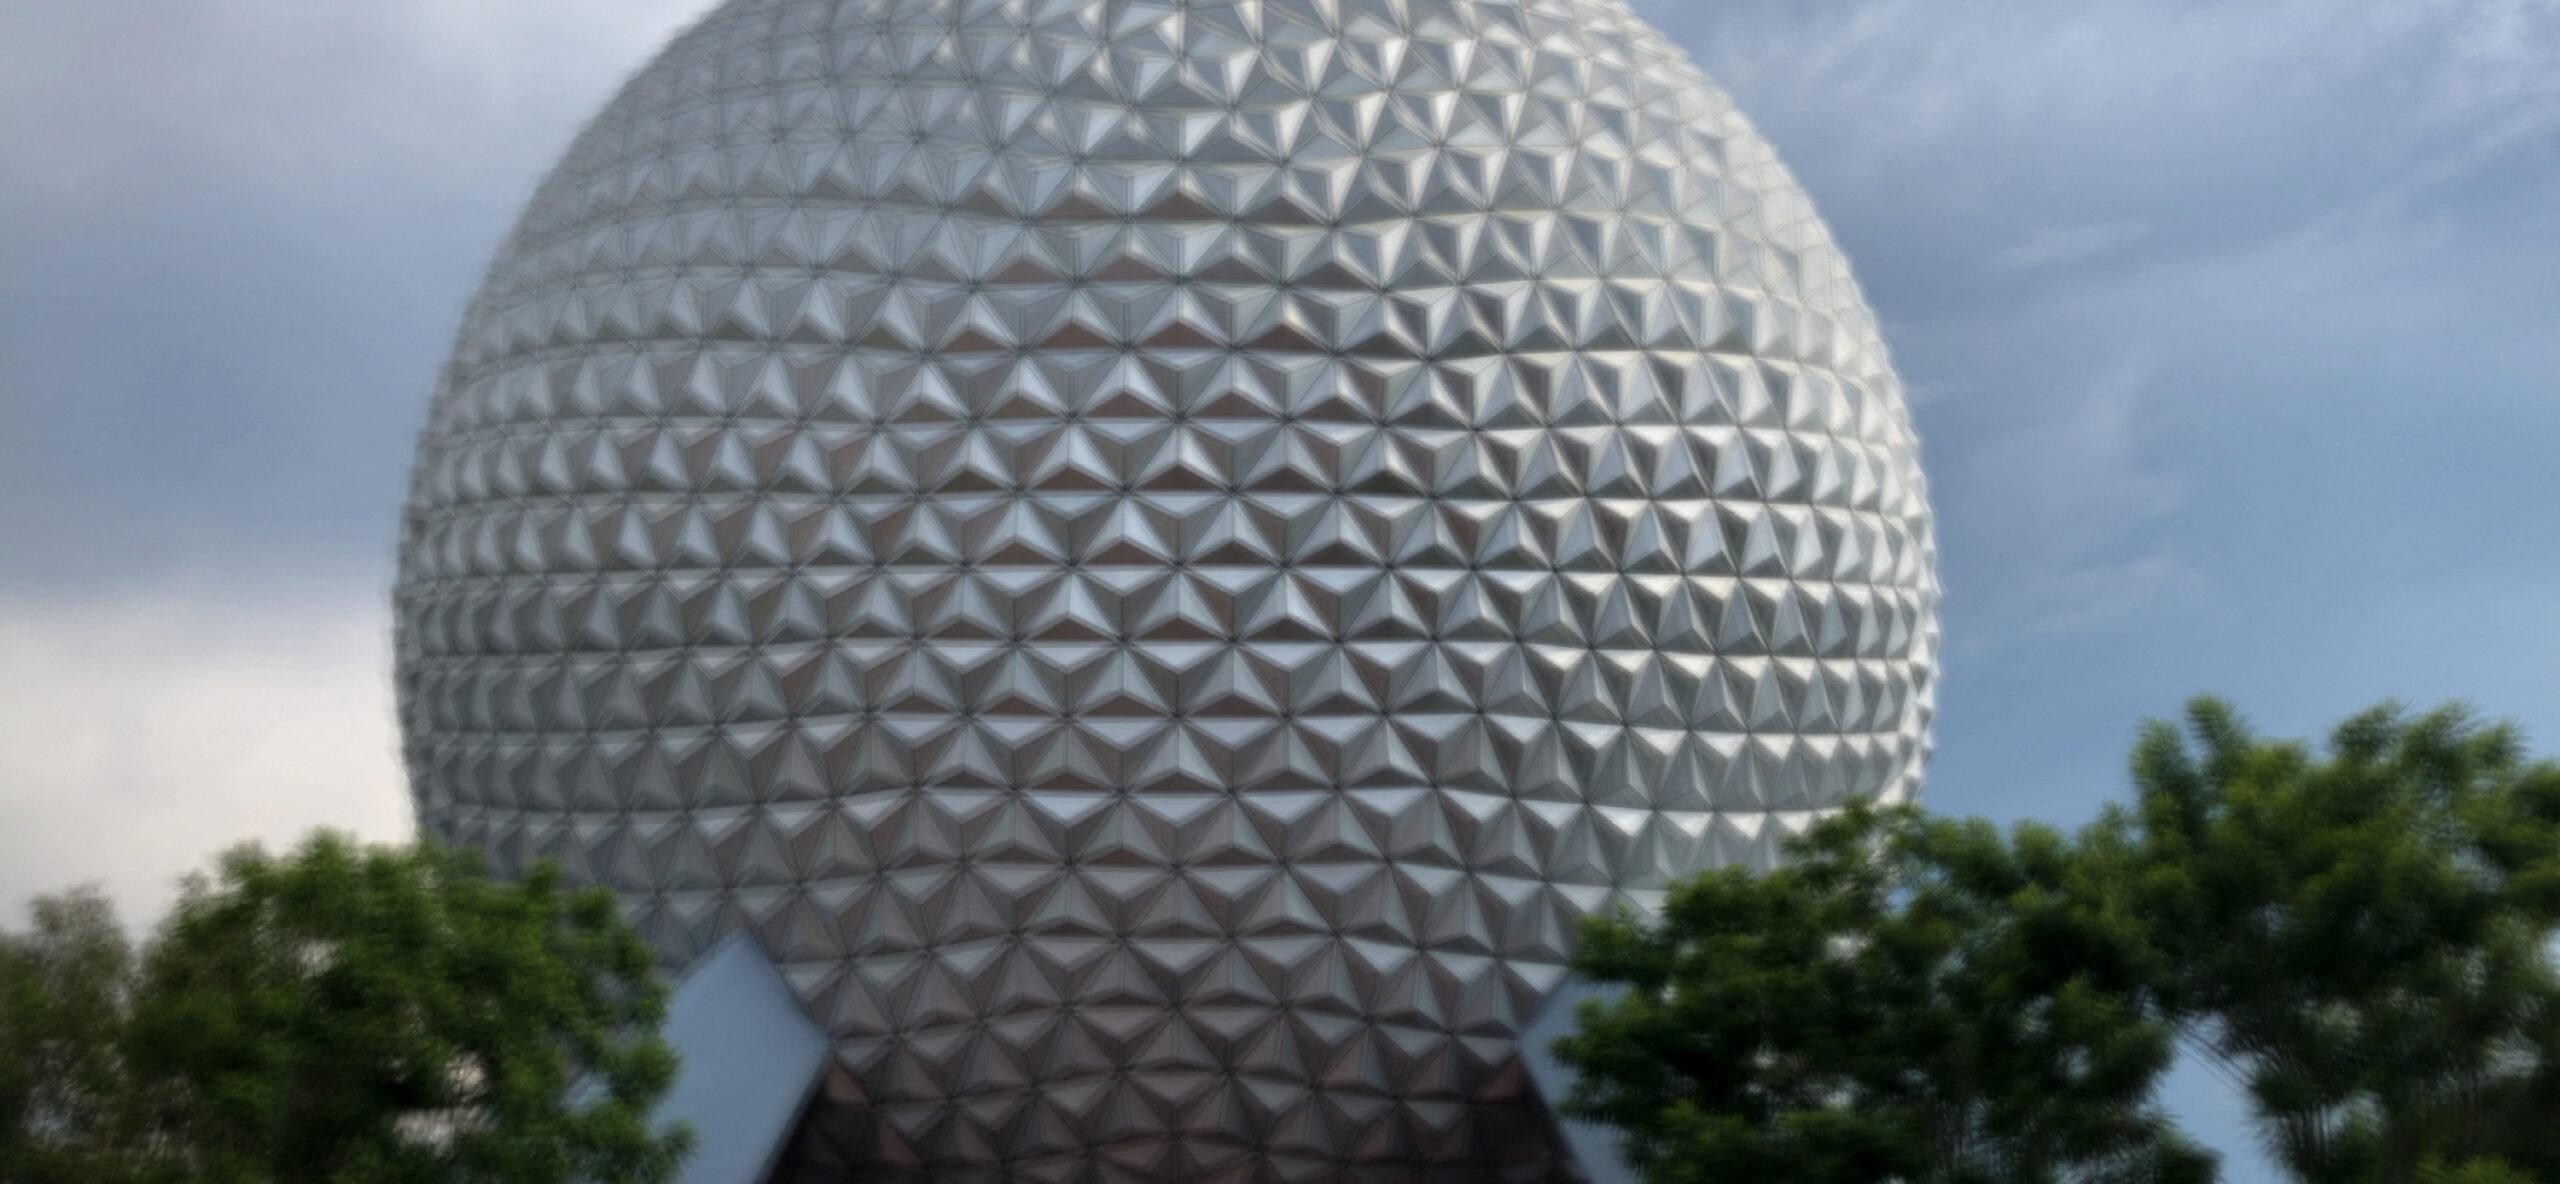 Man Attempts To Kidnap Disney Employee, 'Come To Me Princess'